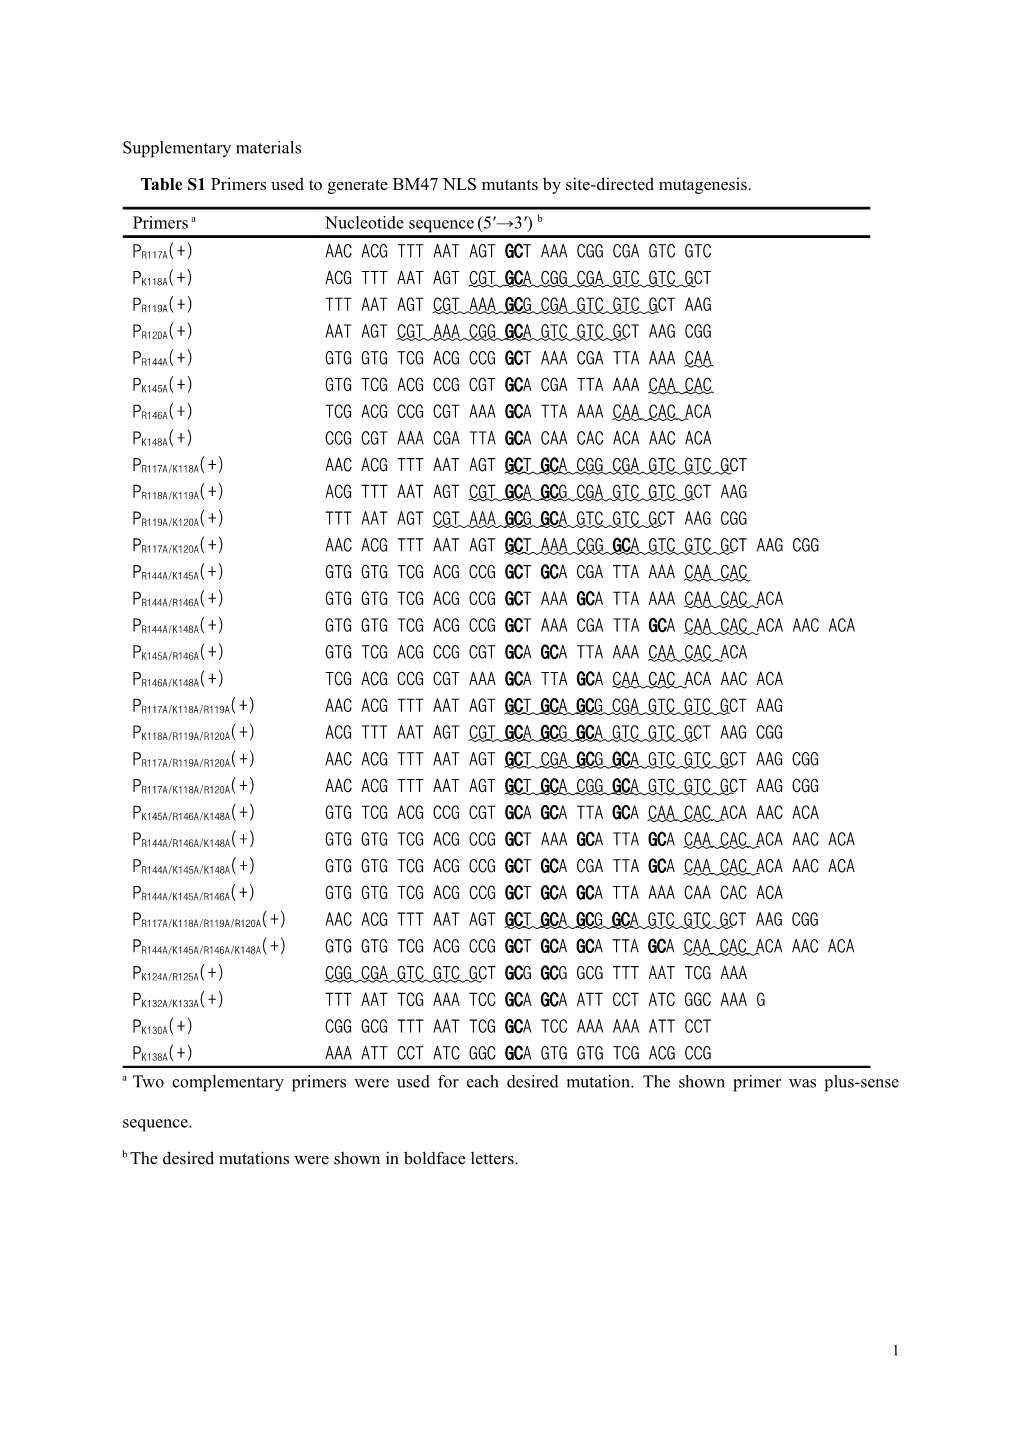 Table S1 Primers Used to Generate BM47 NLS Mutants by Site-Directed Mutagenesis